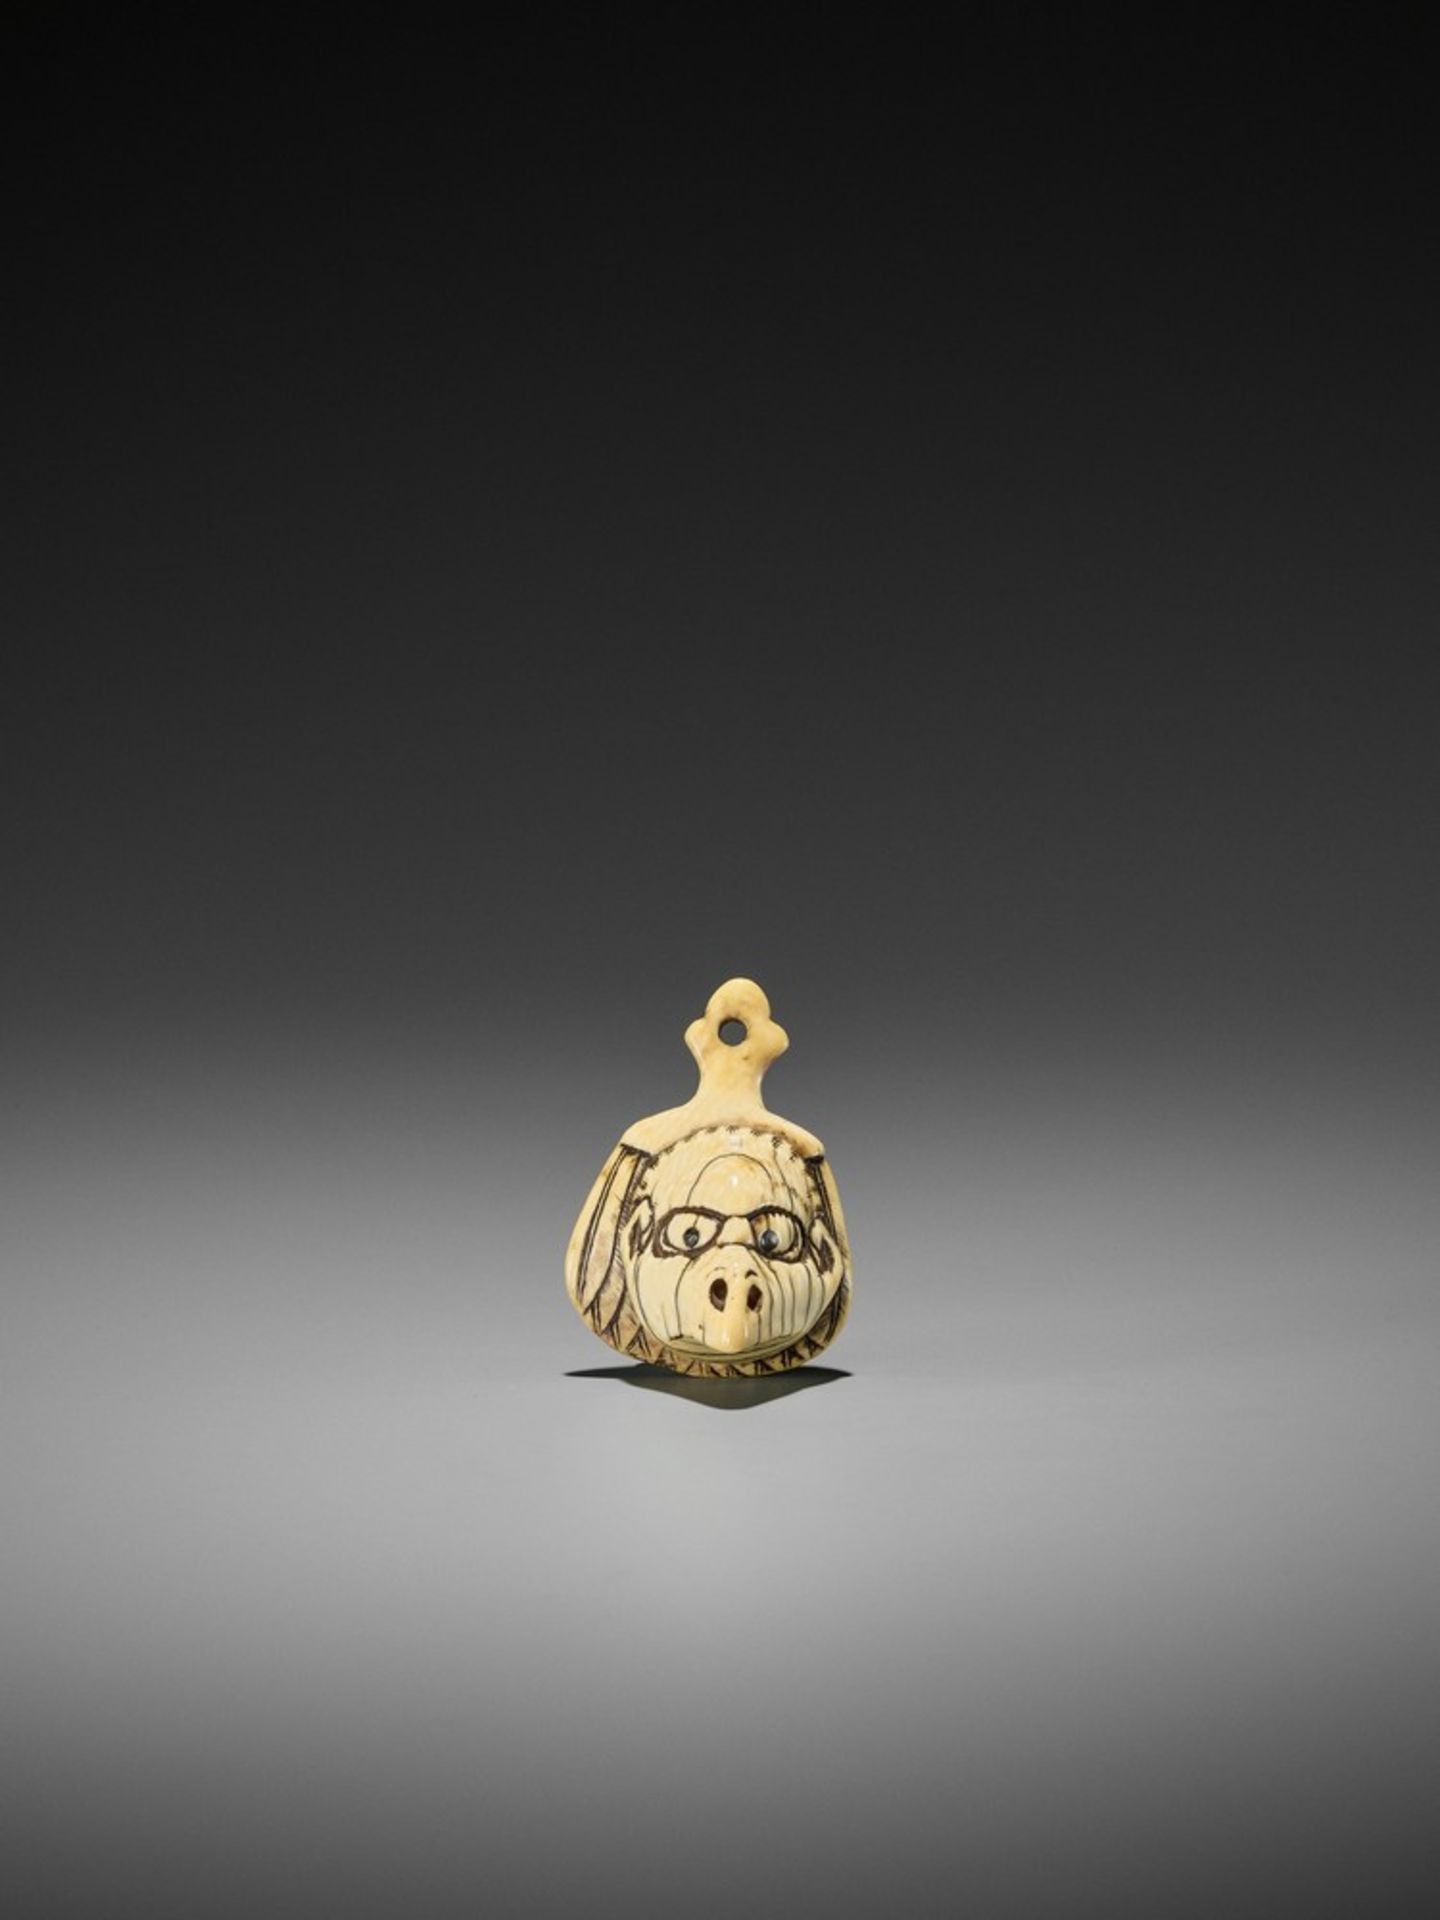 AN IVORY NETSUKE OF A TENGU MASK ON A FEATHERED FAN UnsignedJapan, late 18th to early 19th